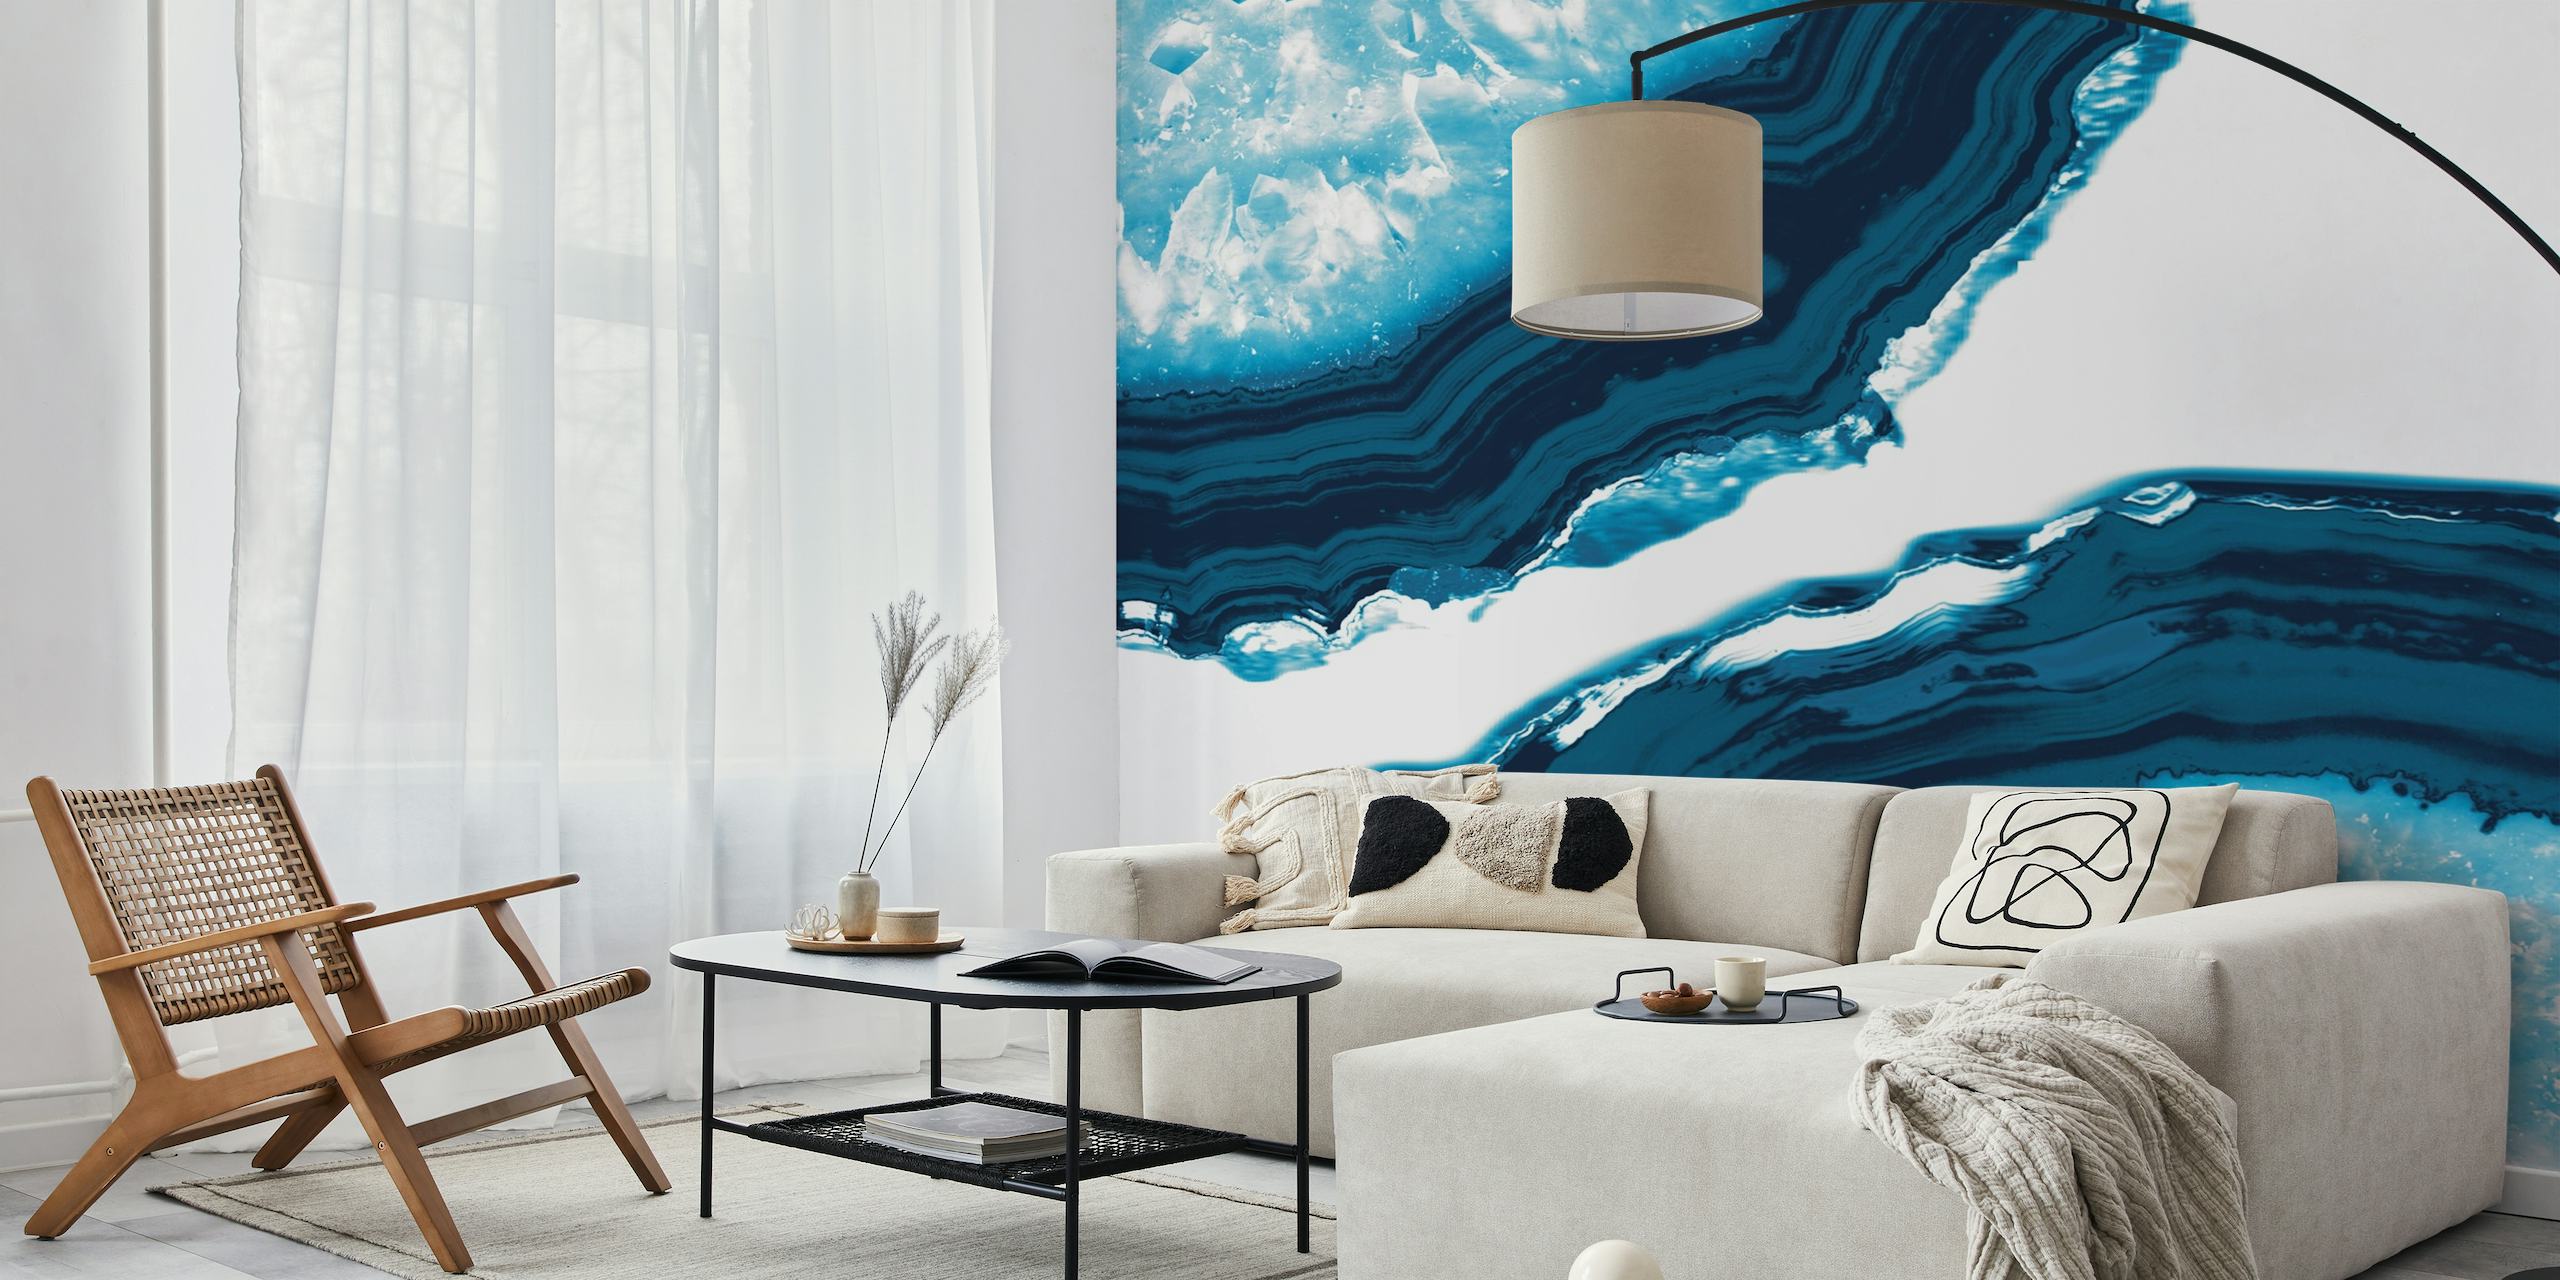 Blue Agate wall mural with deep blue and white patterns